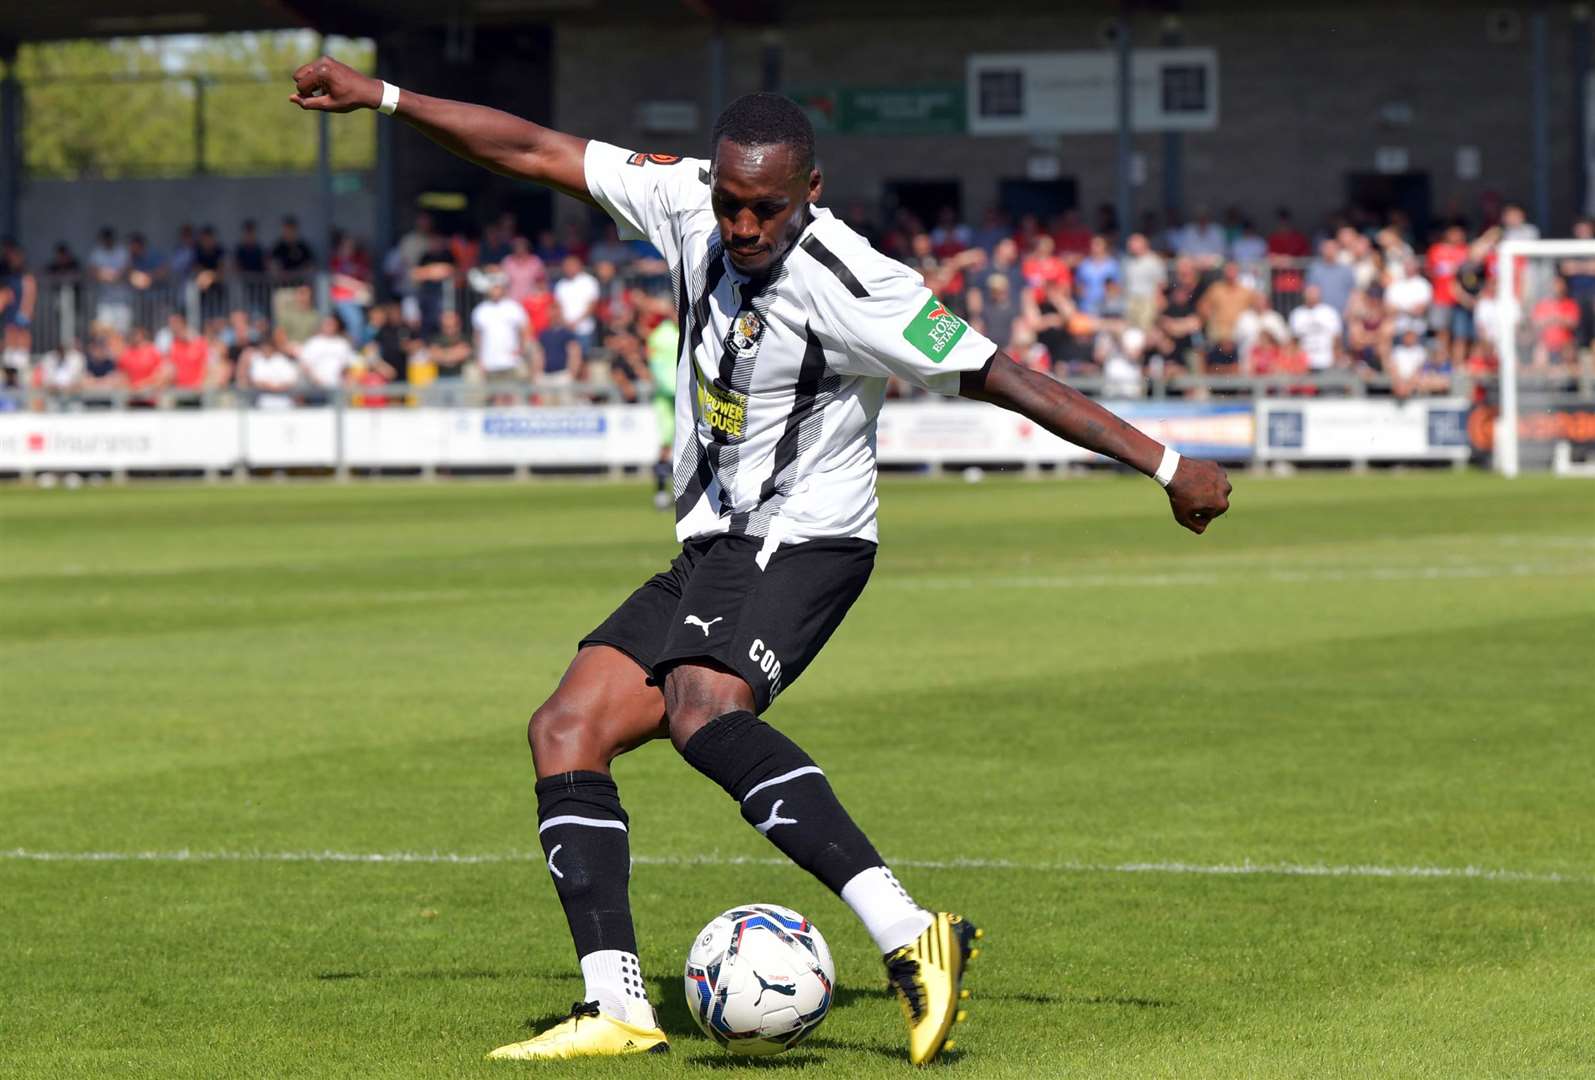 Defender Kristian Campbell scored at the weekend for Dartford but it was a miserable trip to Farnborough for them. Picture: Keith Gilliard